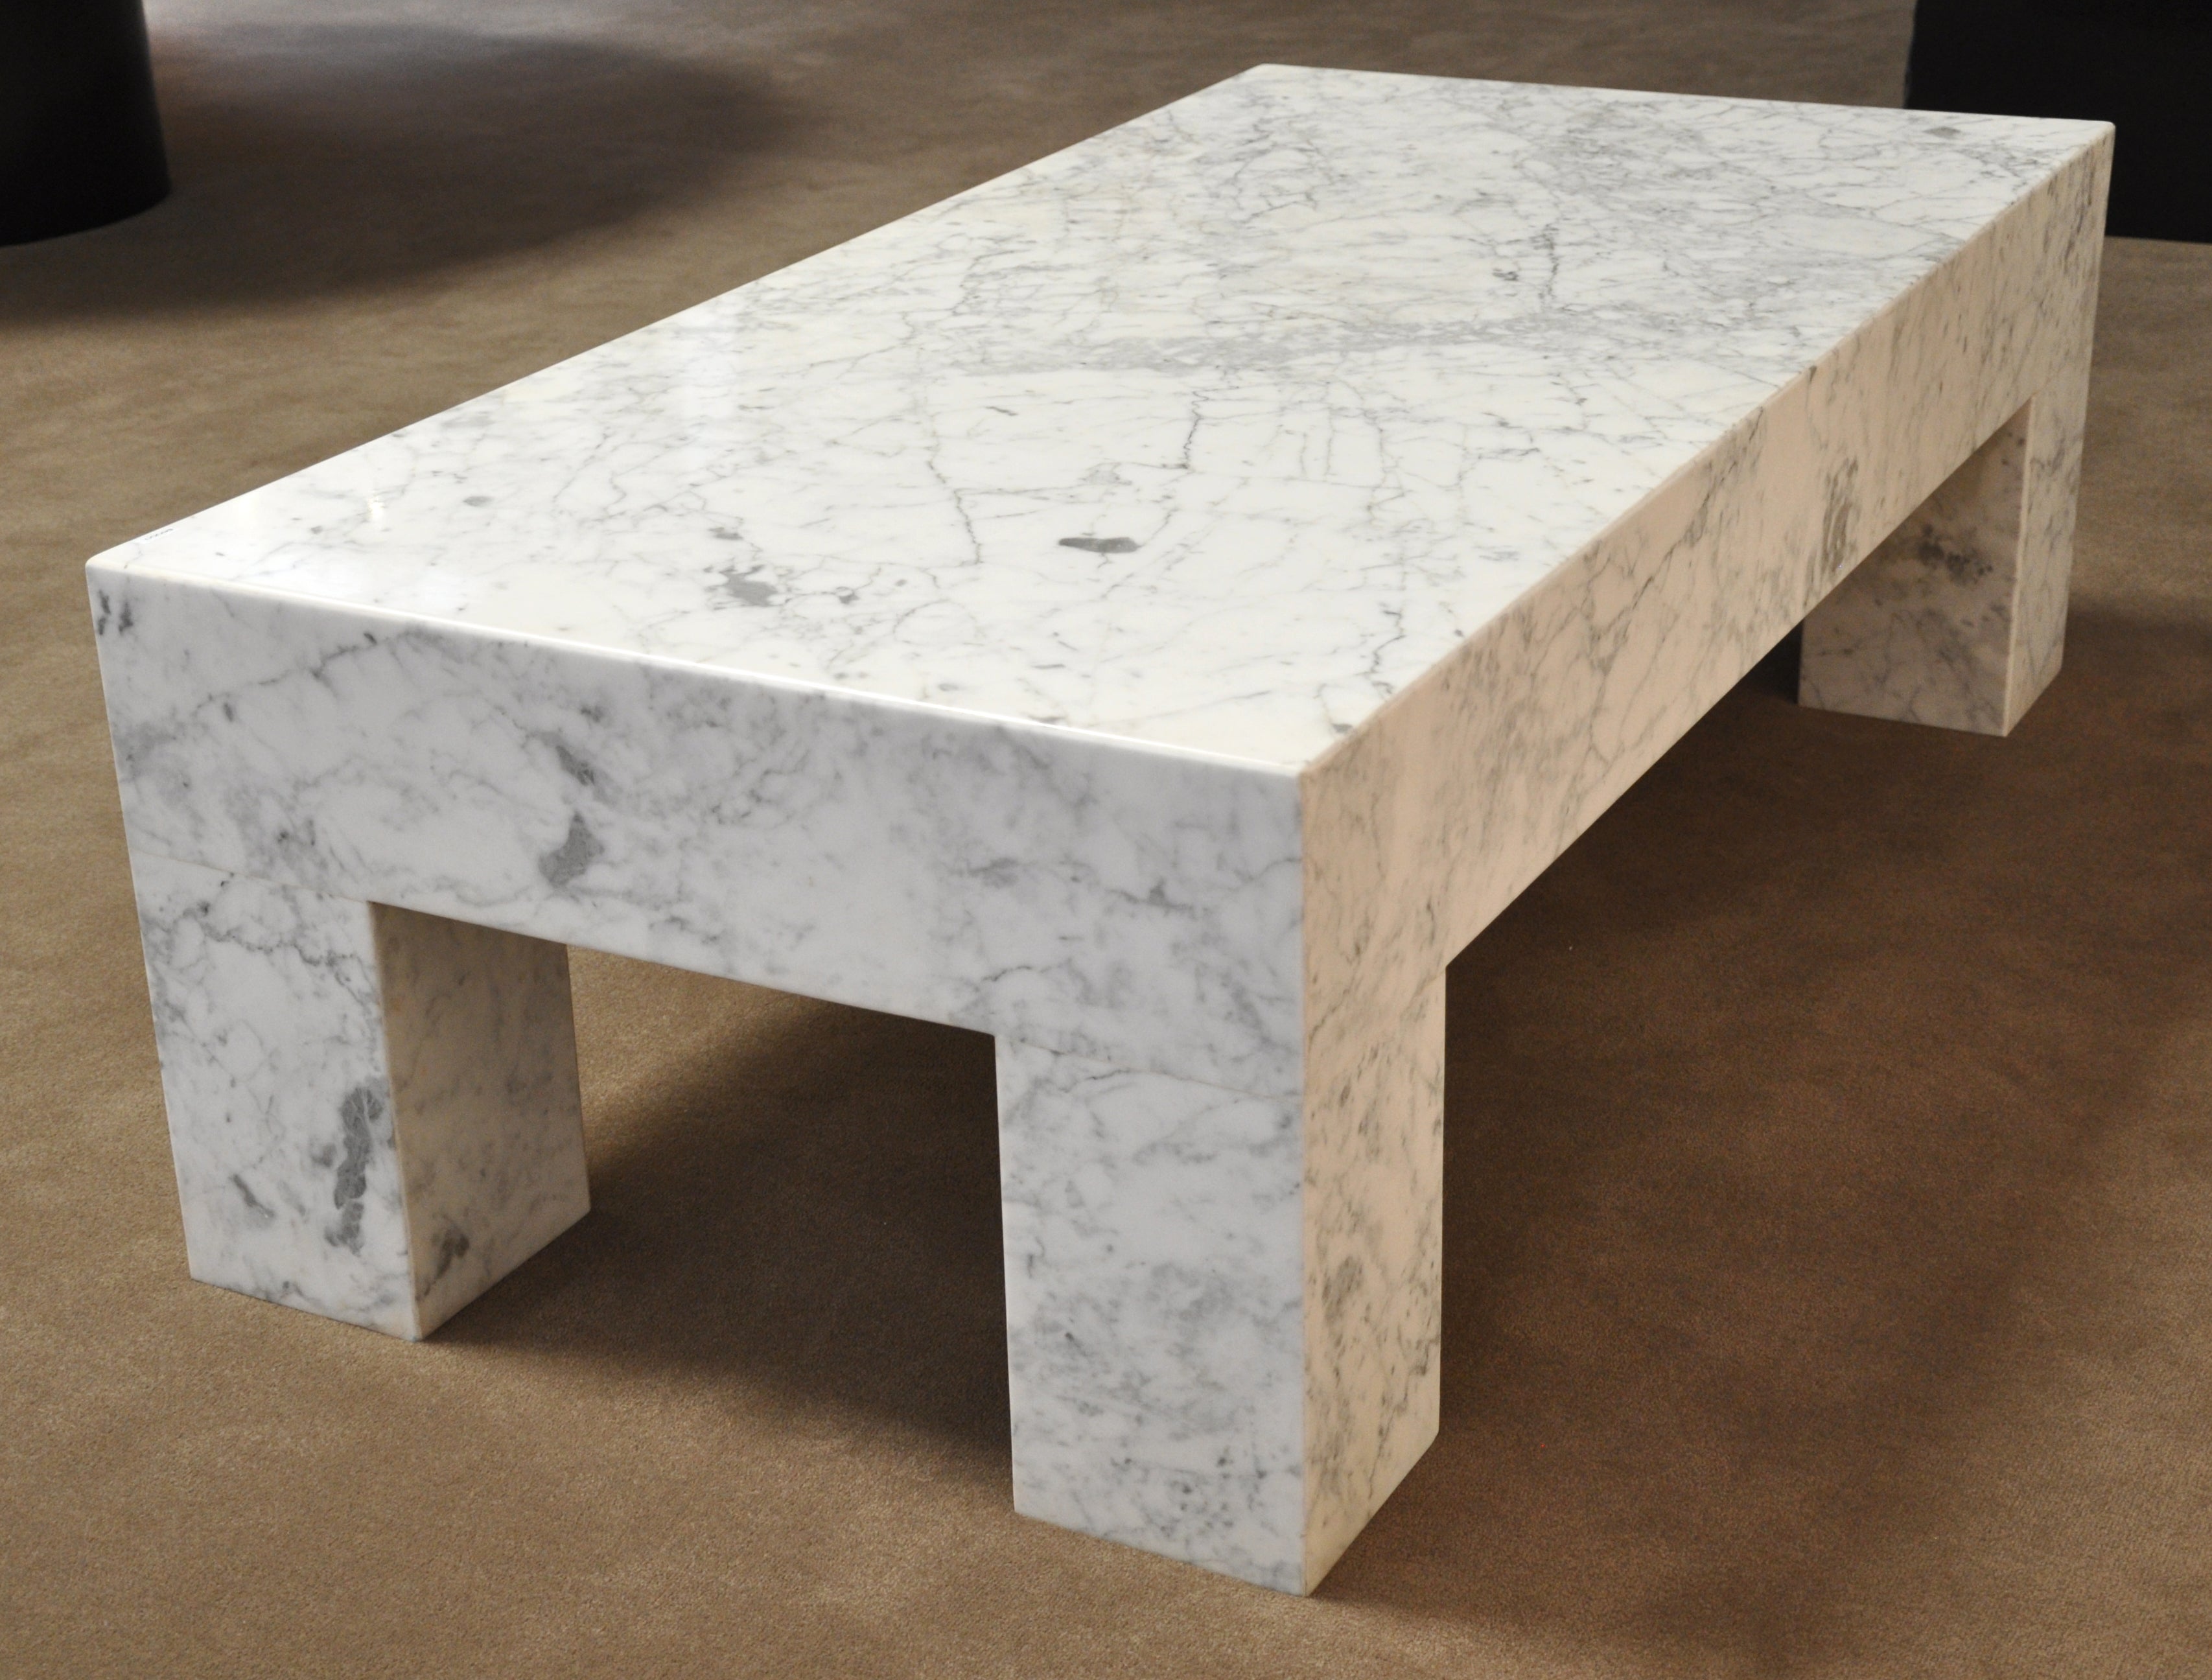 1970s White Carrera Marble Coffee Table